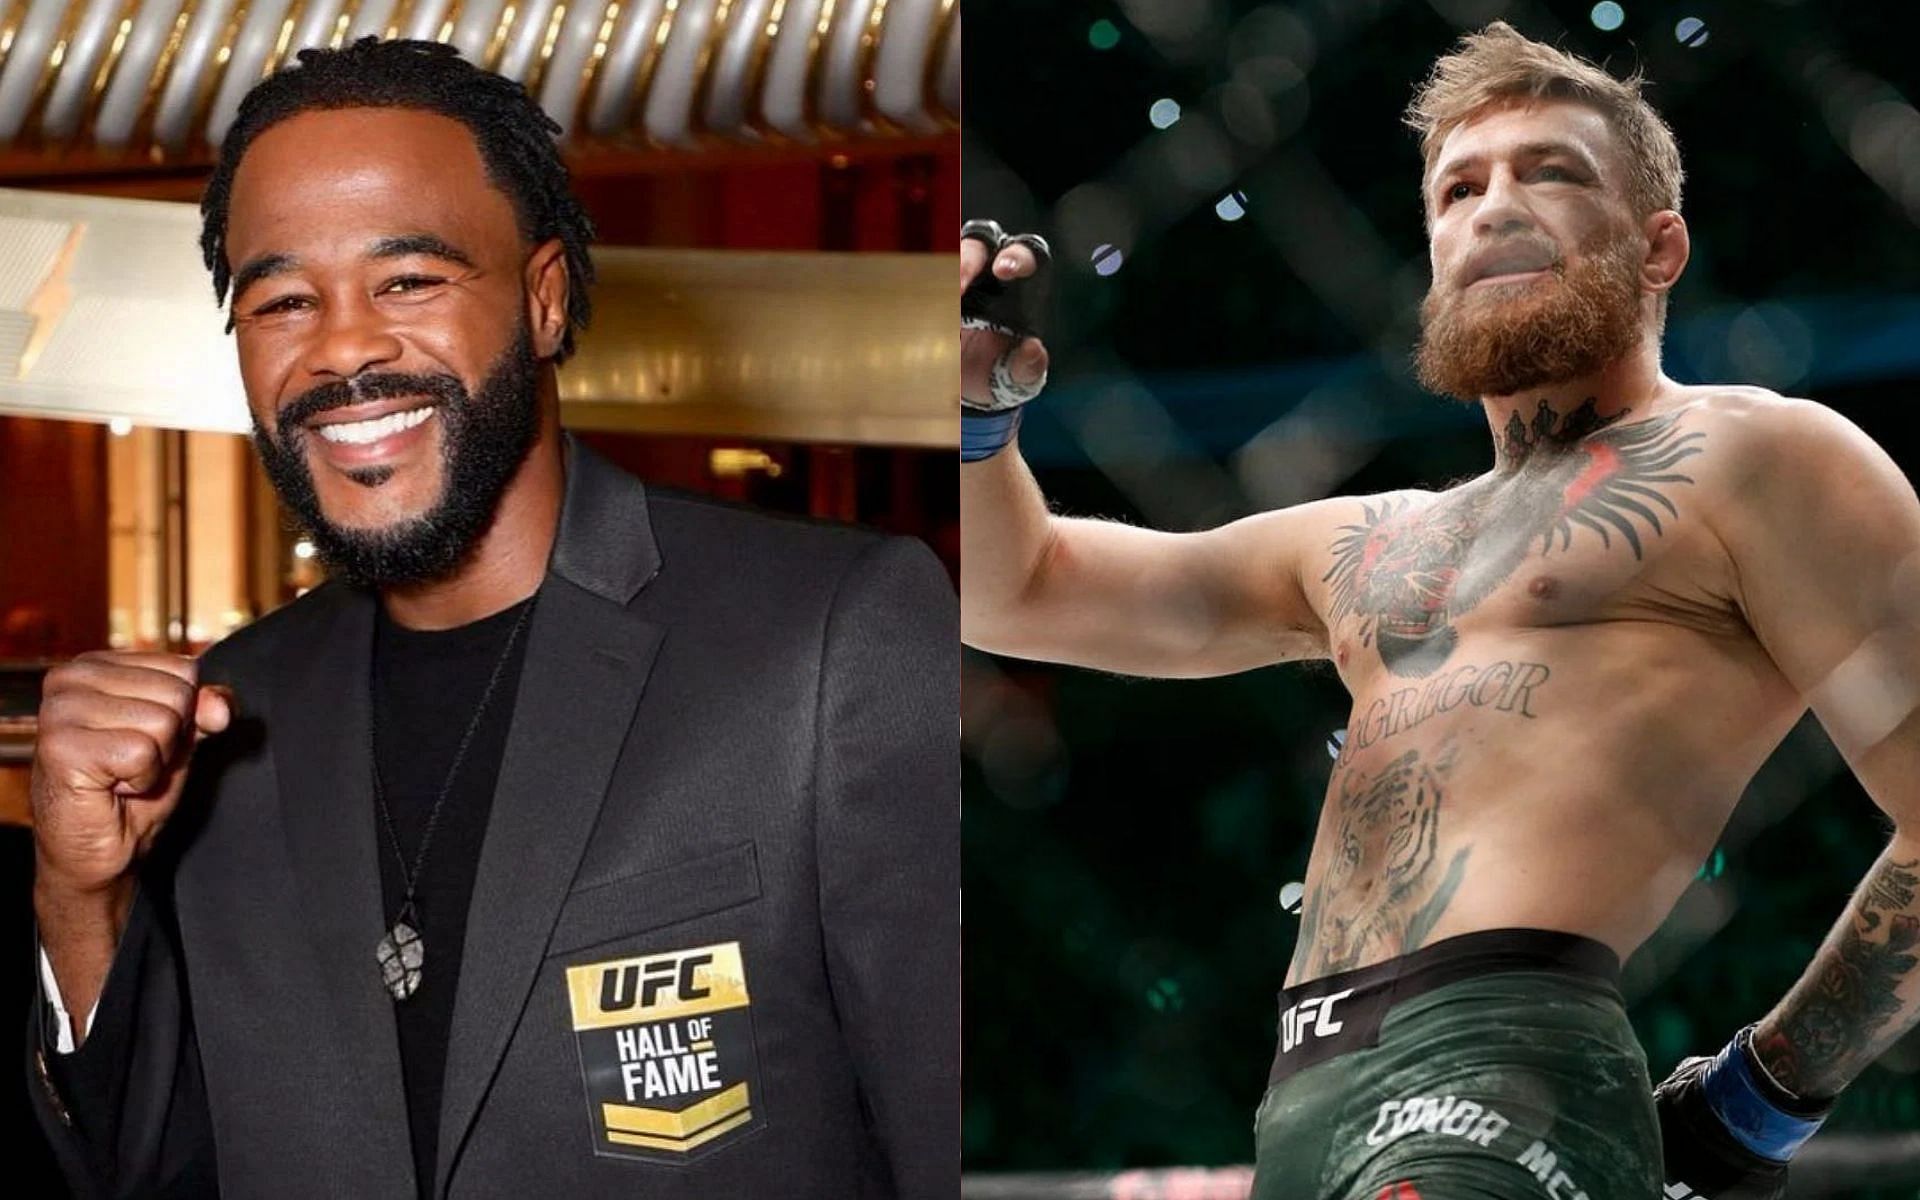 Rashad Evans (left) and Conor McGregor (right)